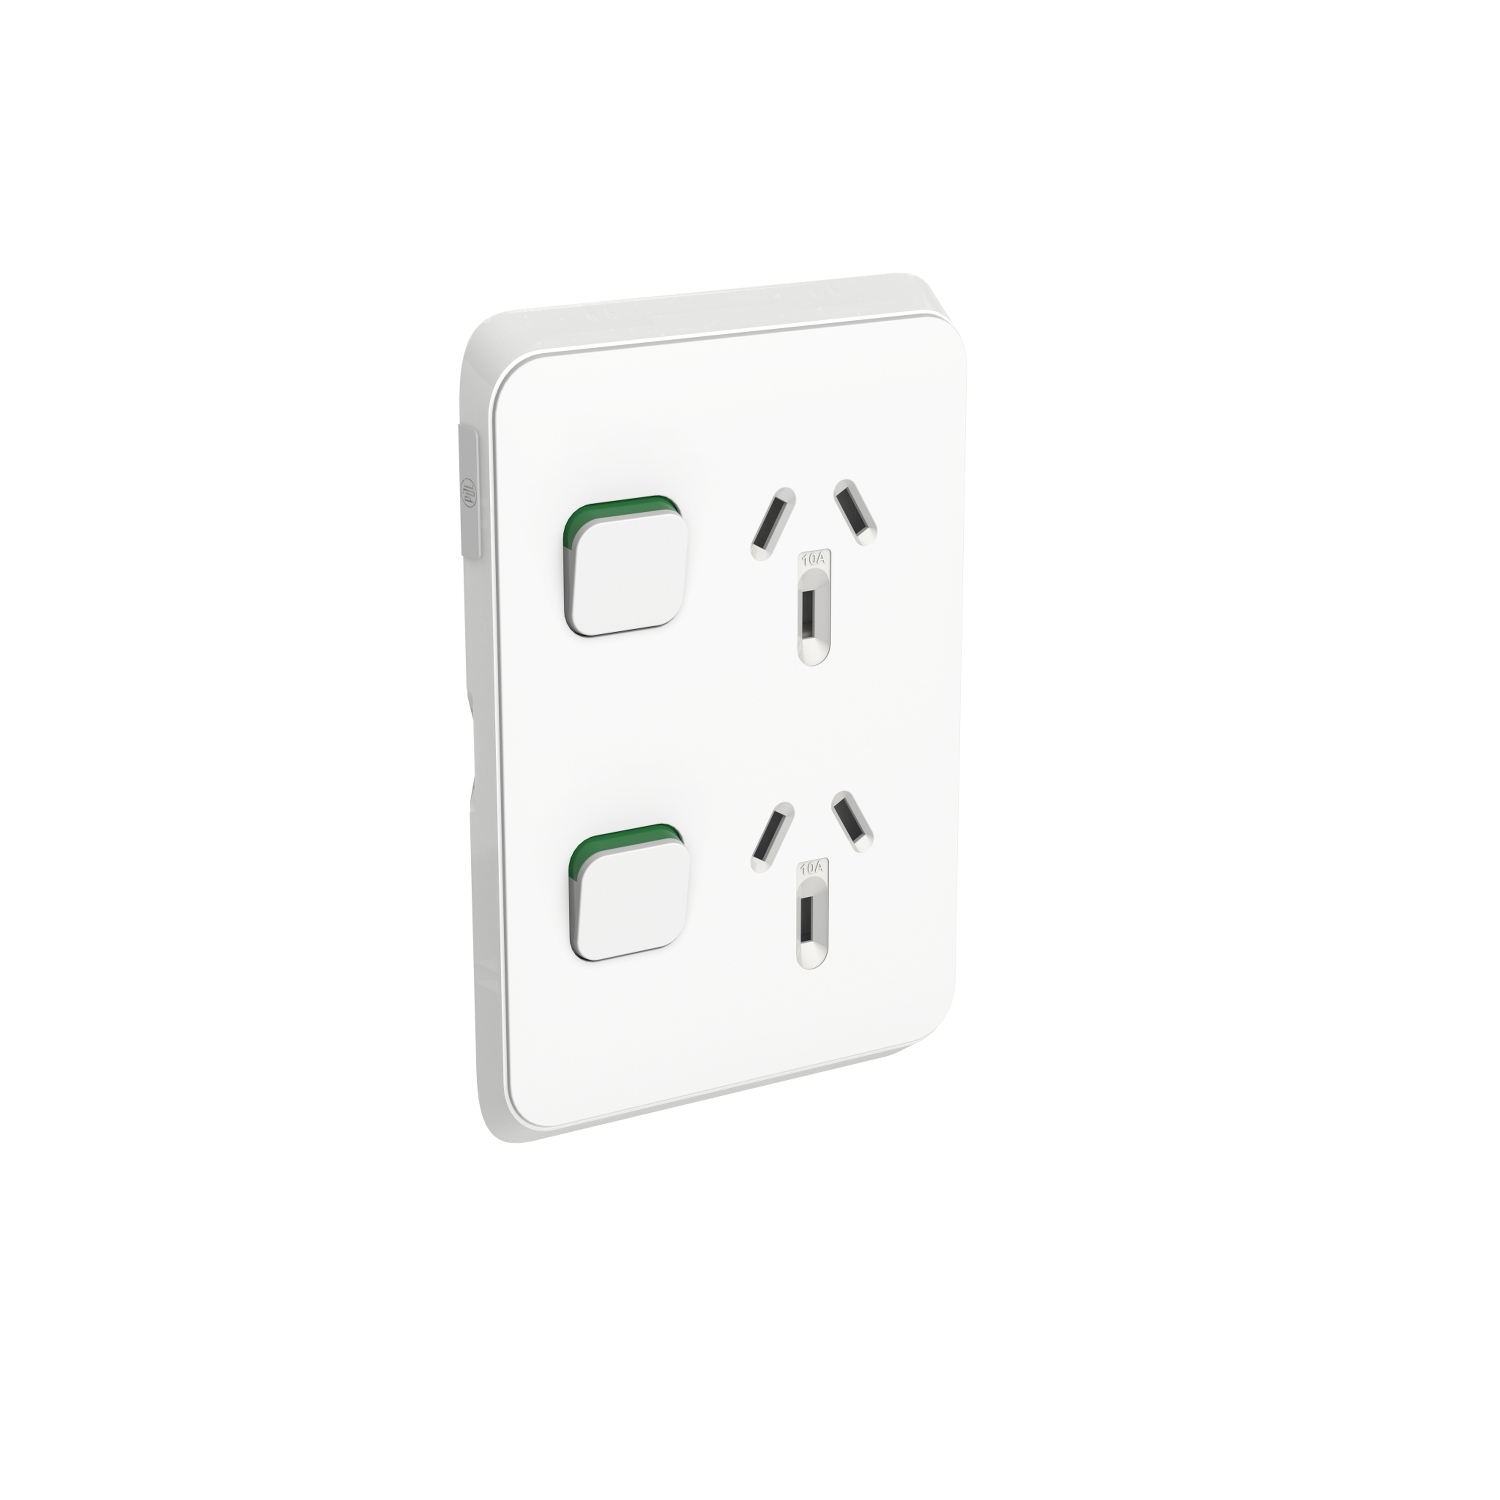 PDL Iconic, switched socket, 2 switch & 2 socket, vert, 10 A - Vivid White